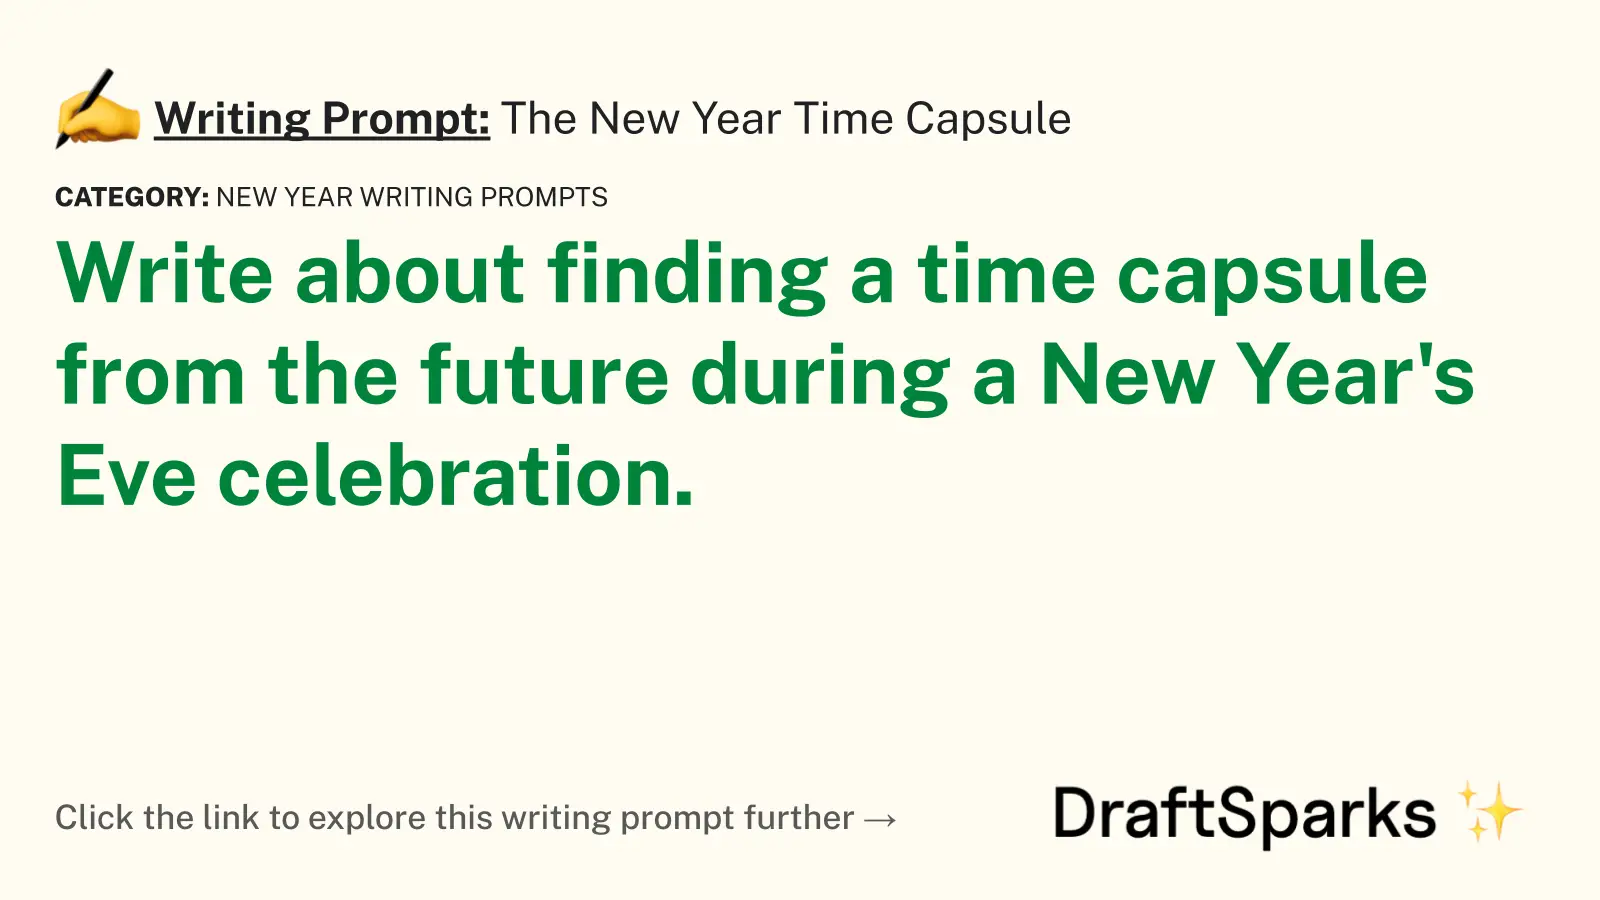 The New Year Time Capsule